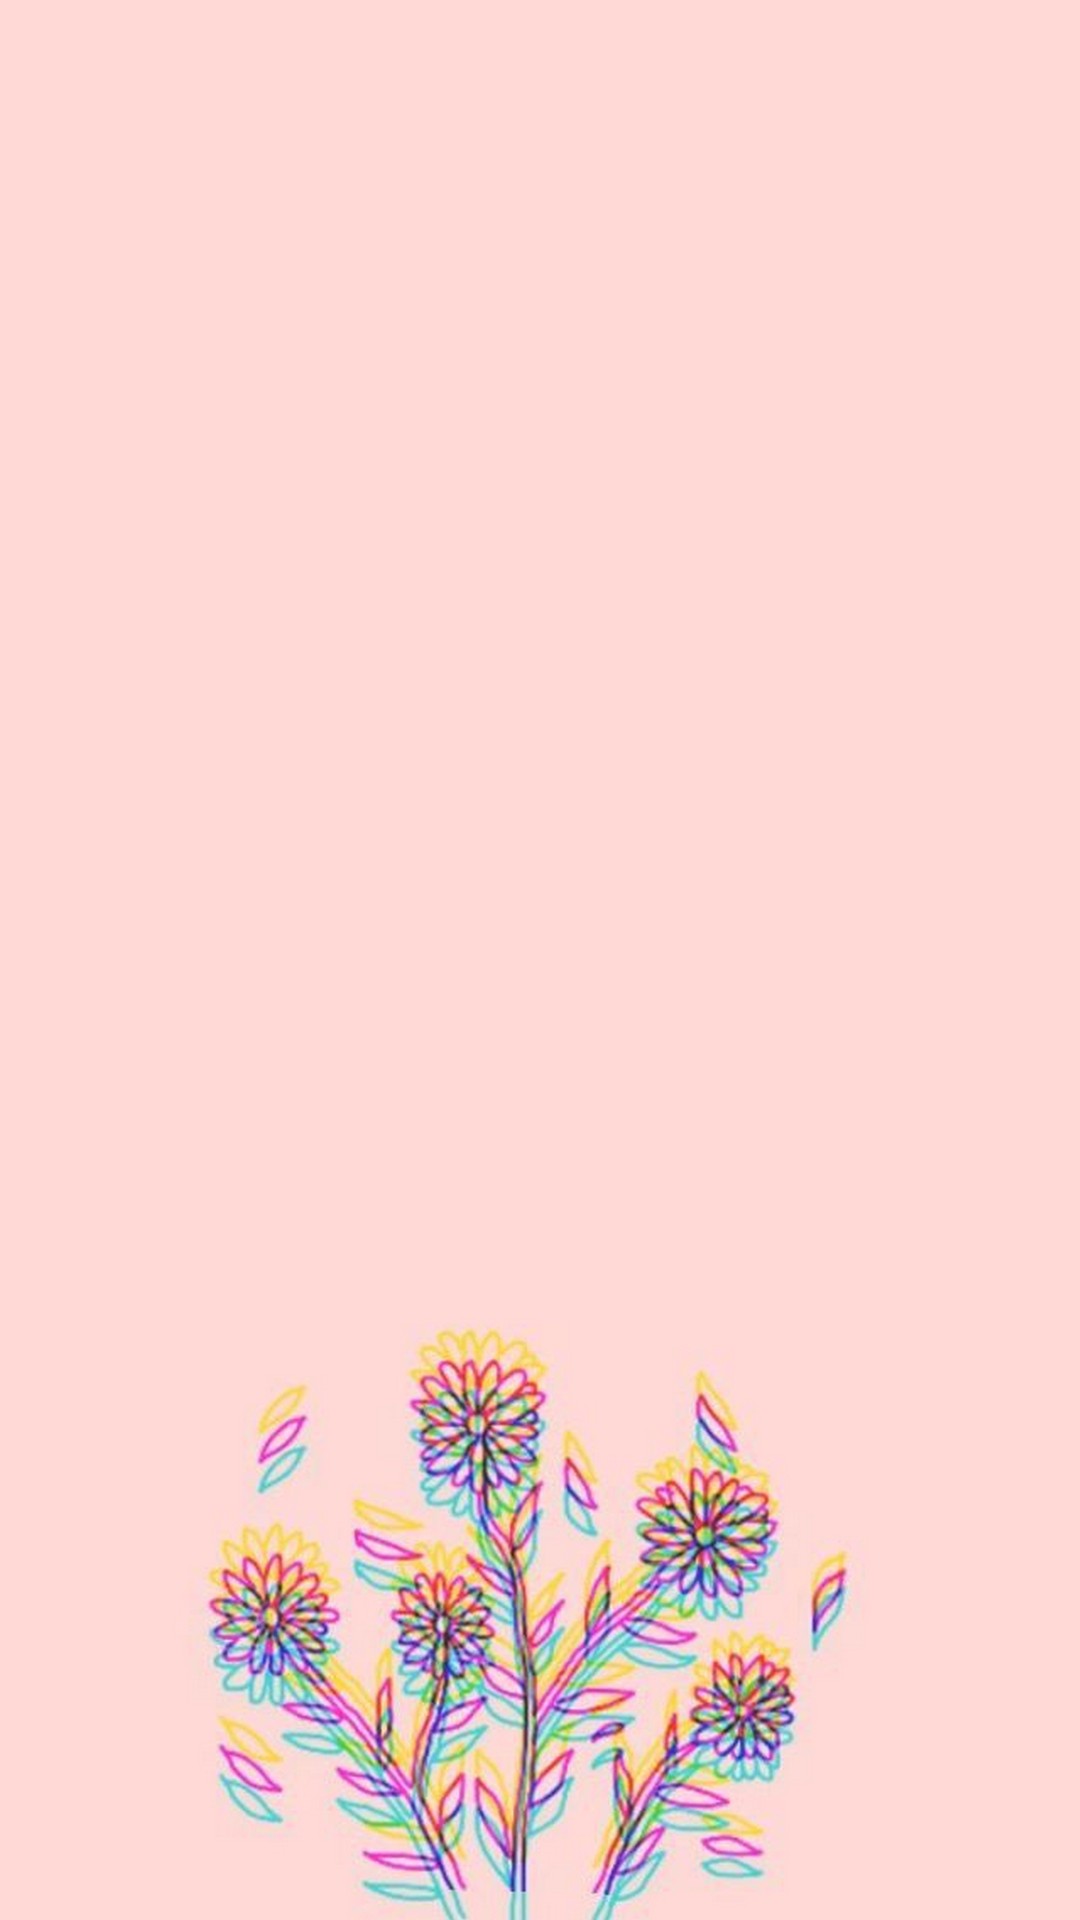 Aesthetic Backgrounds For Android with high-resolution 1080x1920 pixel. You can use this wallpaper for your Android backgrounds, Tablet, Samsung Screensavers, Mobile Phone Lock Screen and another Smartphones device